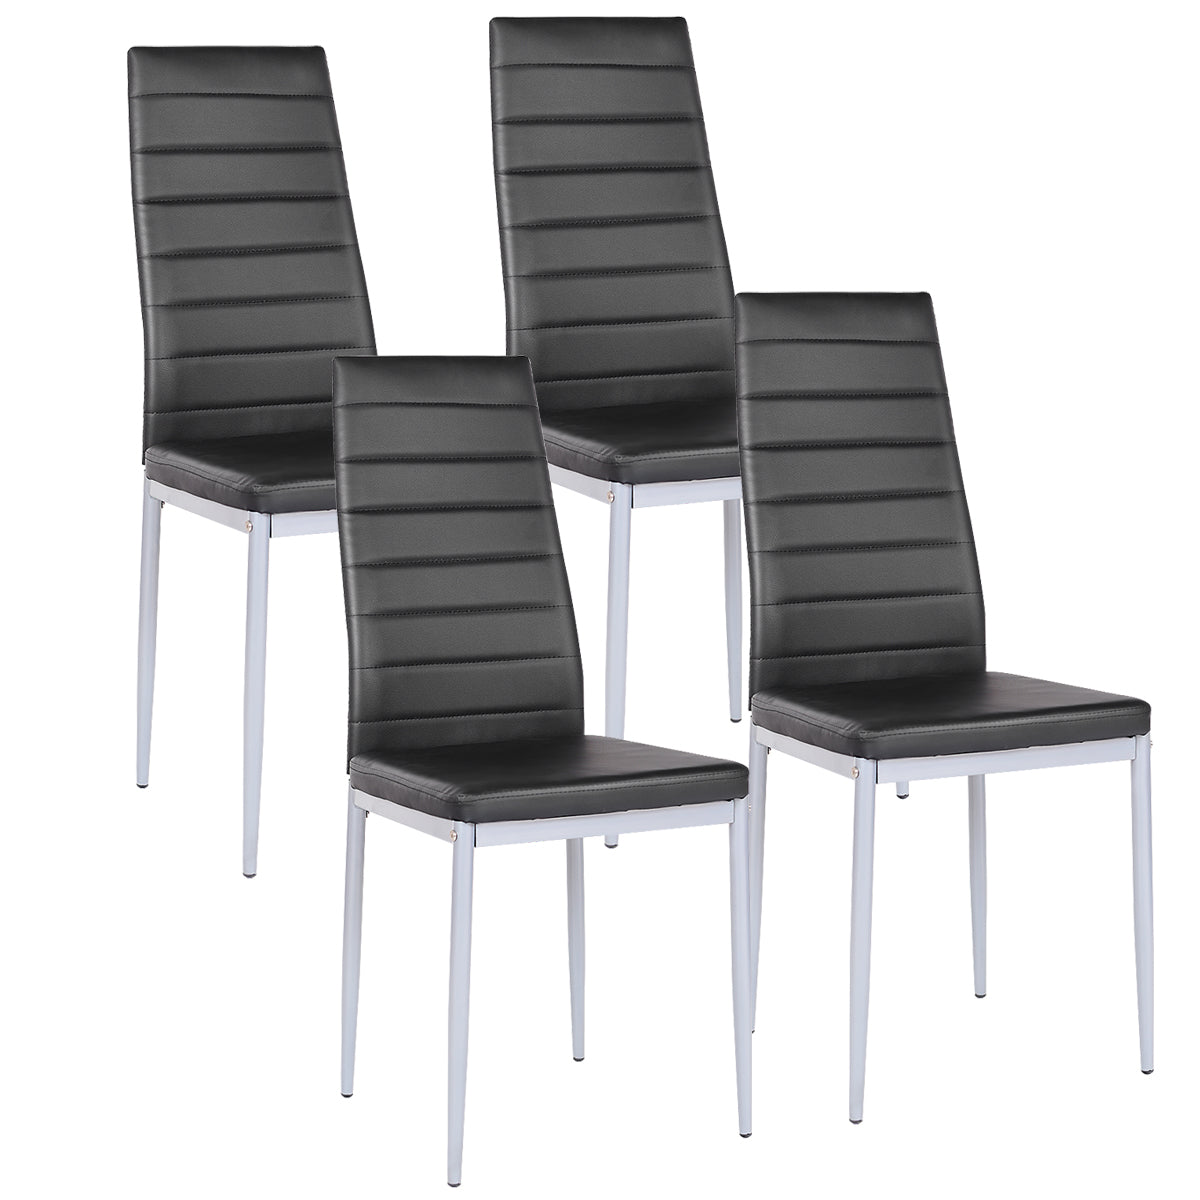 Giantex Set of 4 PU Leather Dining Side Chairs with Padded Seat Foot Cap